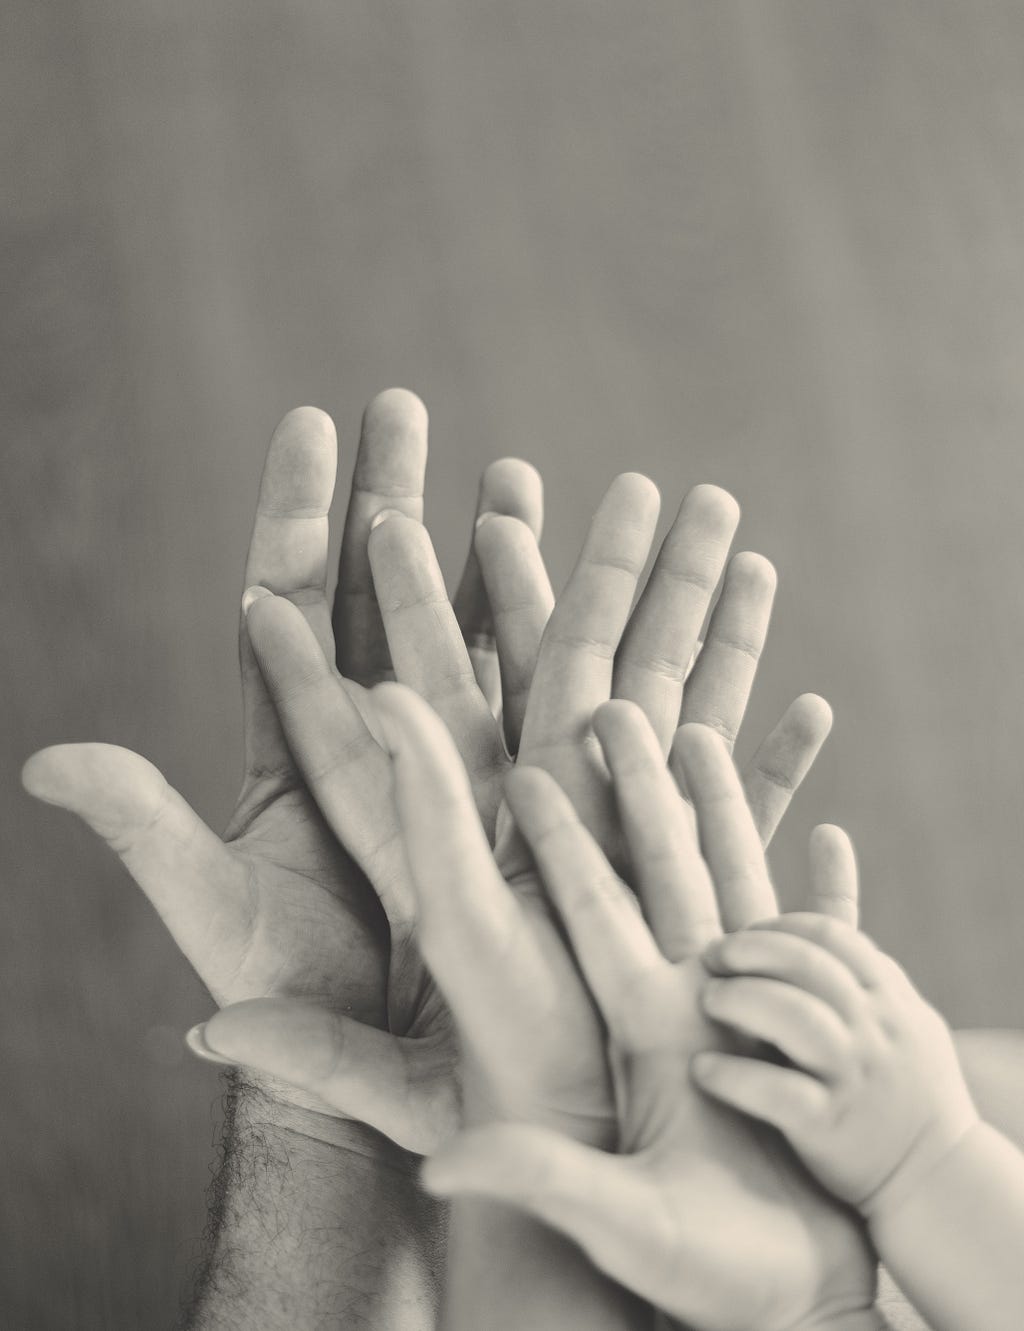 A black and white shot of five hands in varying sizes, depicting caregivers and their child.